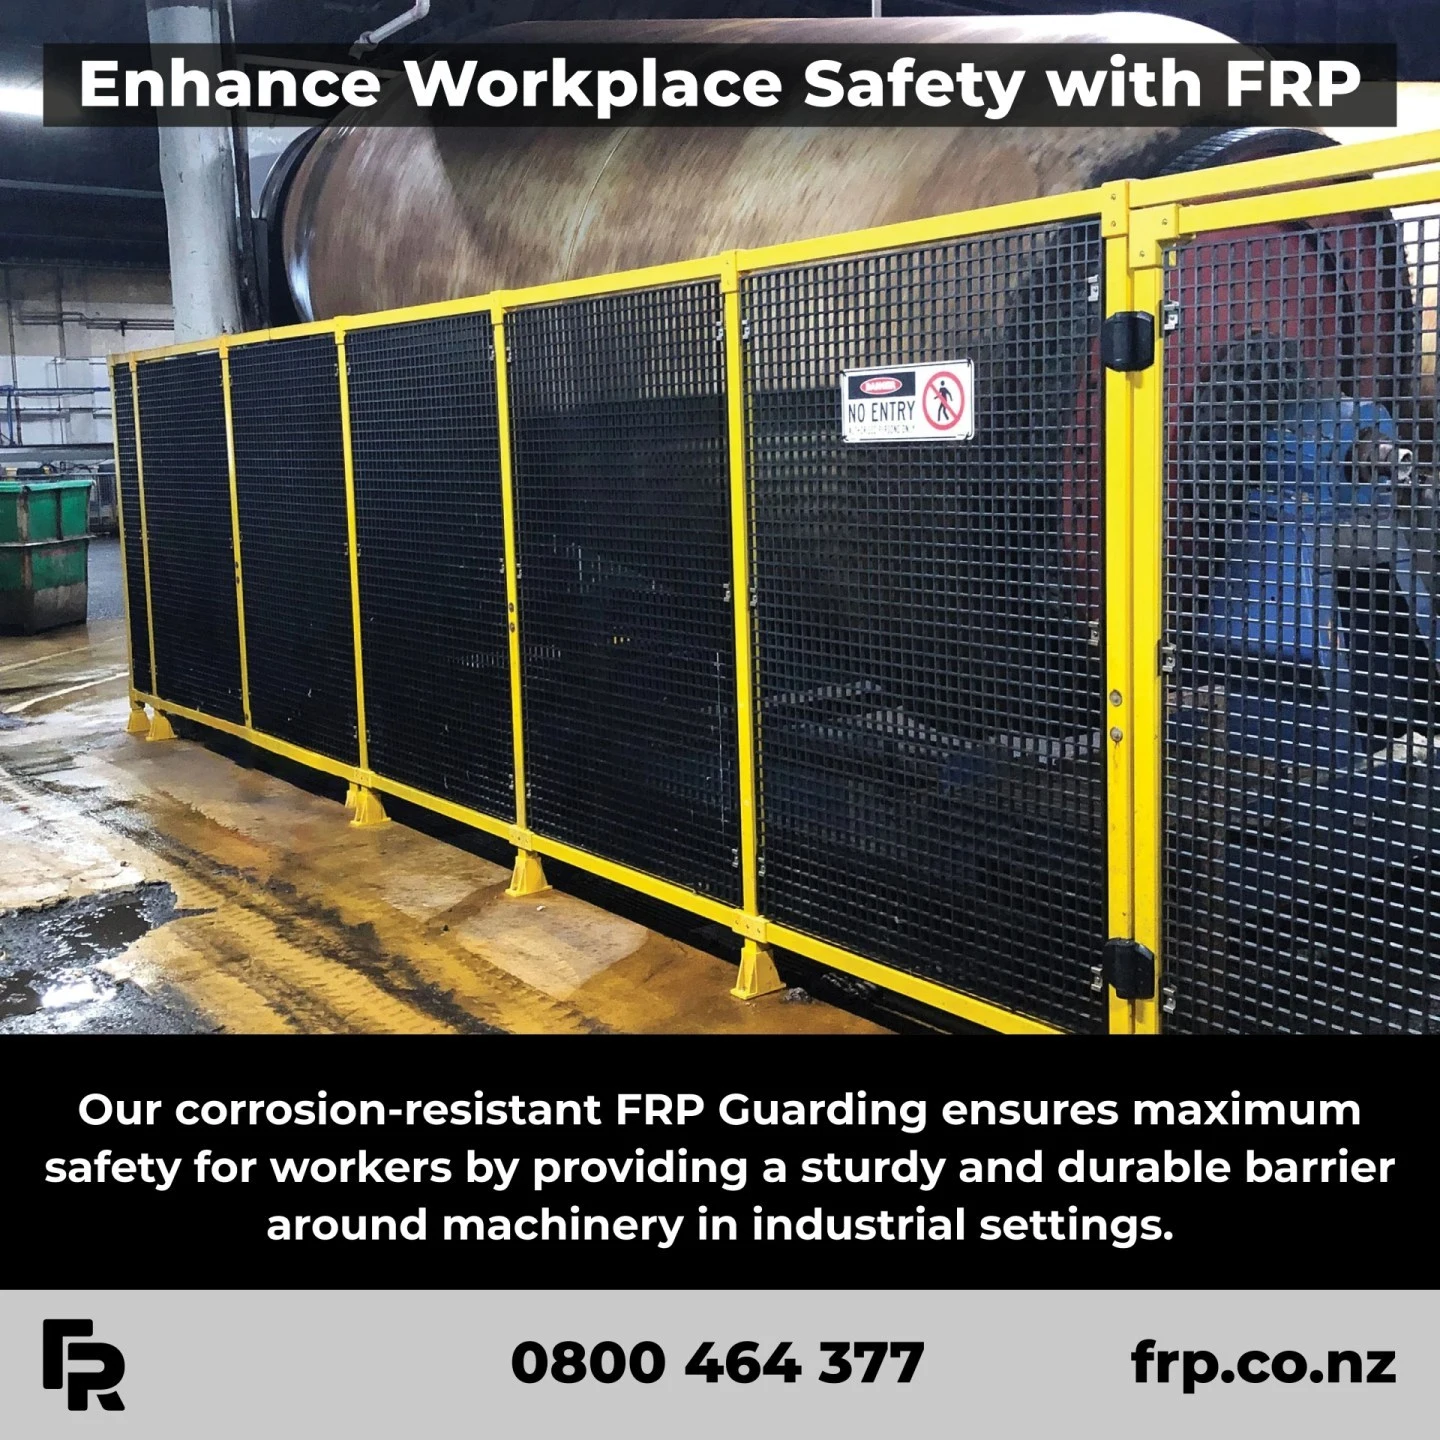 FRP and steel options available!

#frp #frpproducts #industrial #commercial #workplacesafety #safety #machinery #engineering #factory #nzarchitects